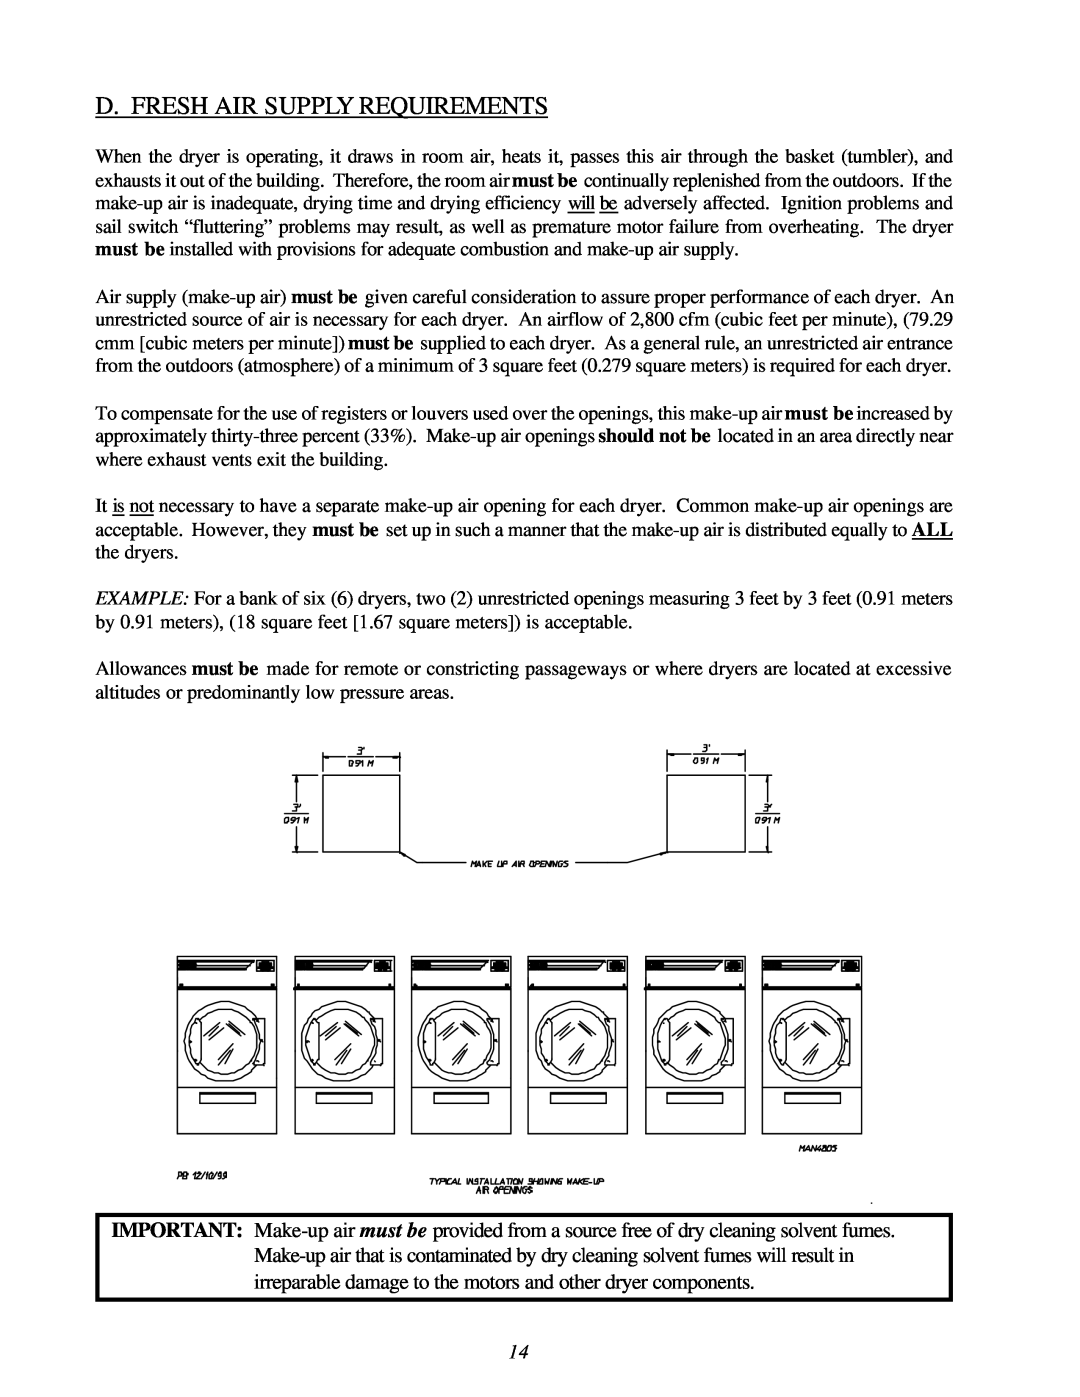 American Dryer Corp ML-122D installation manual D. Fresh Air Supply Requirements 